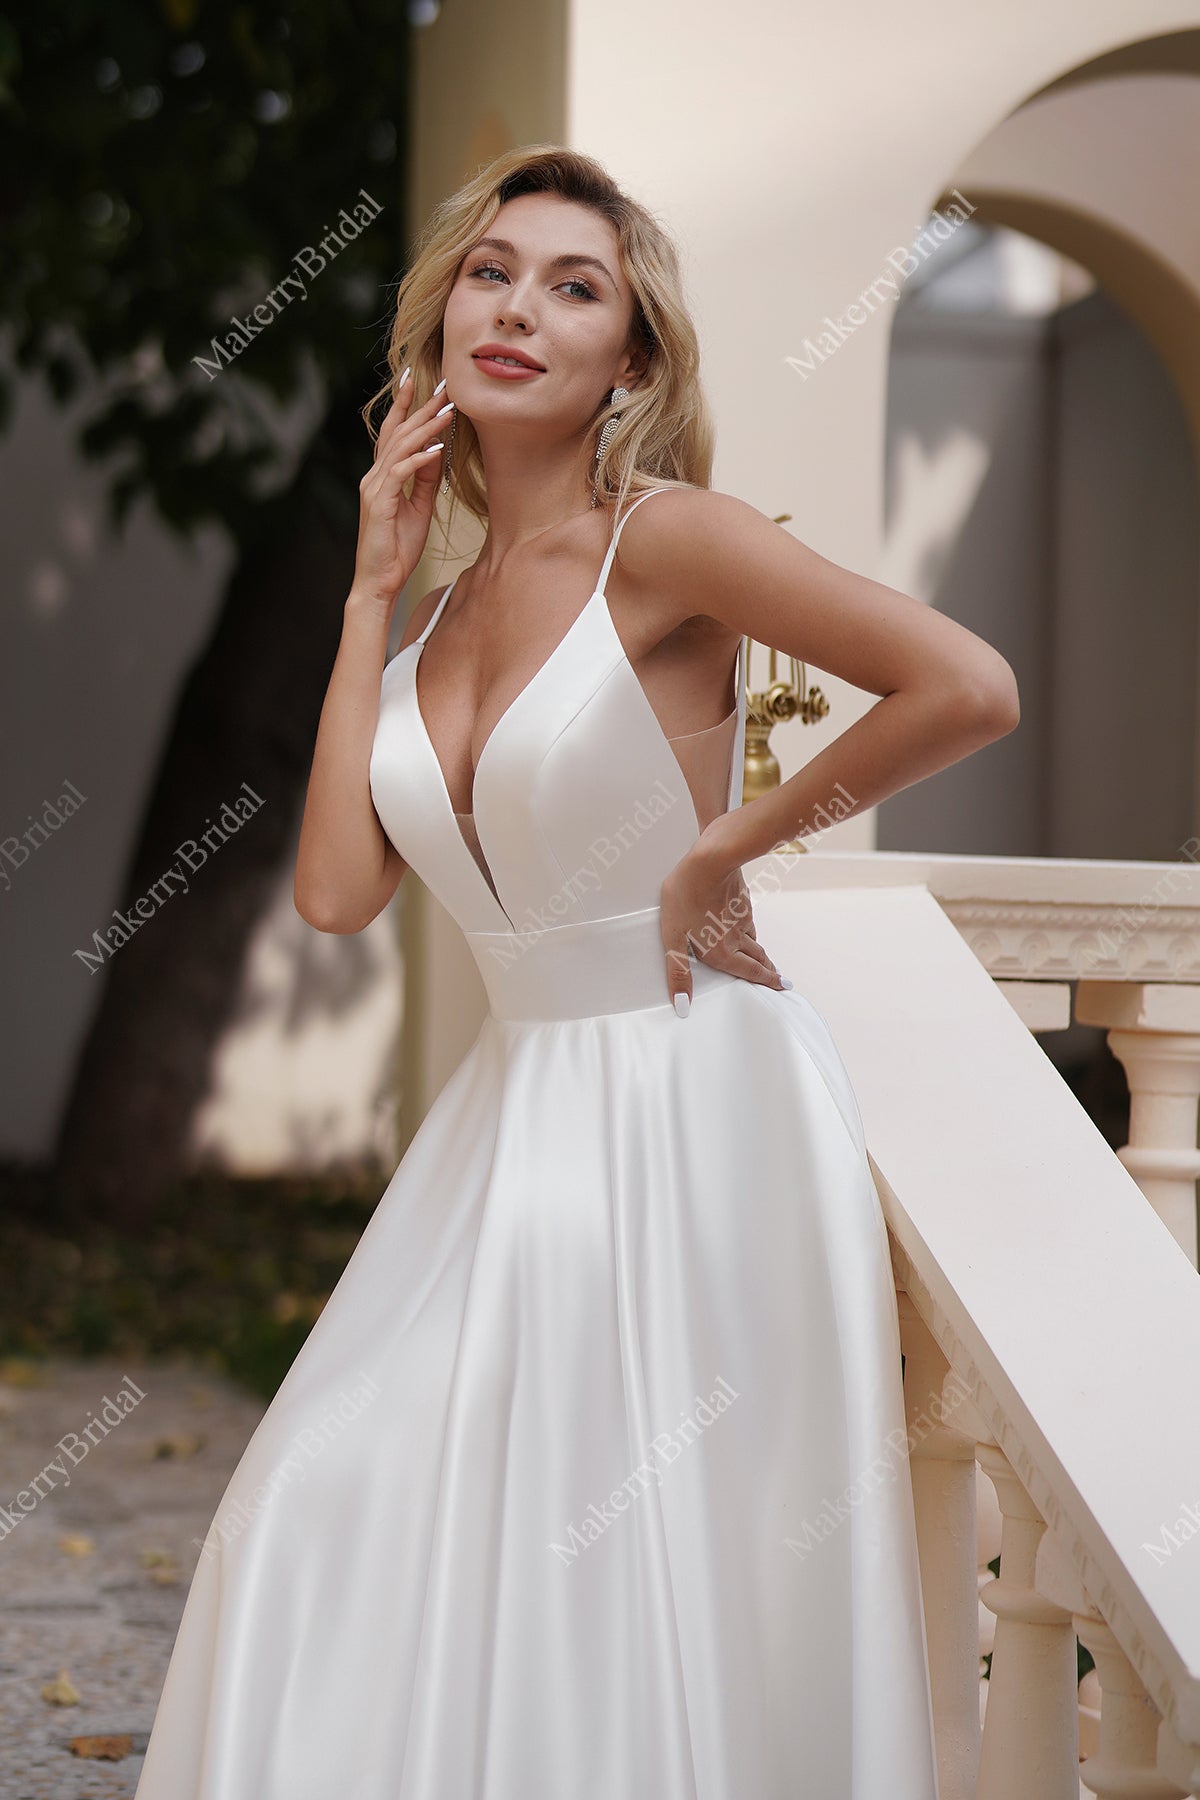 Simple Satin Wedding Dresses With Beaded Backless